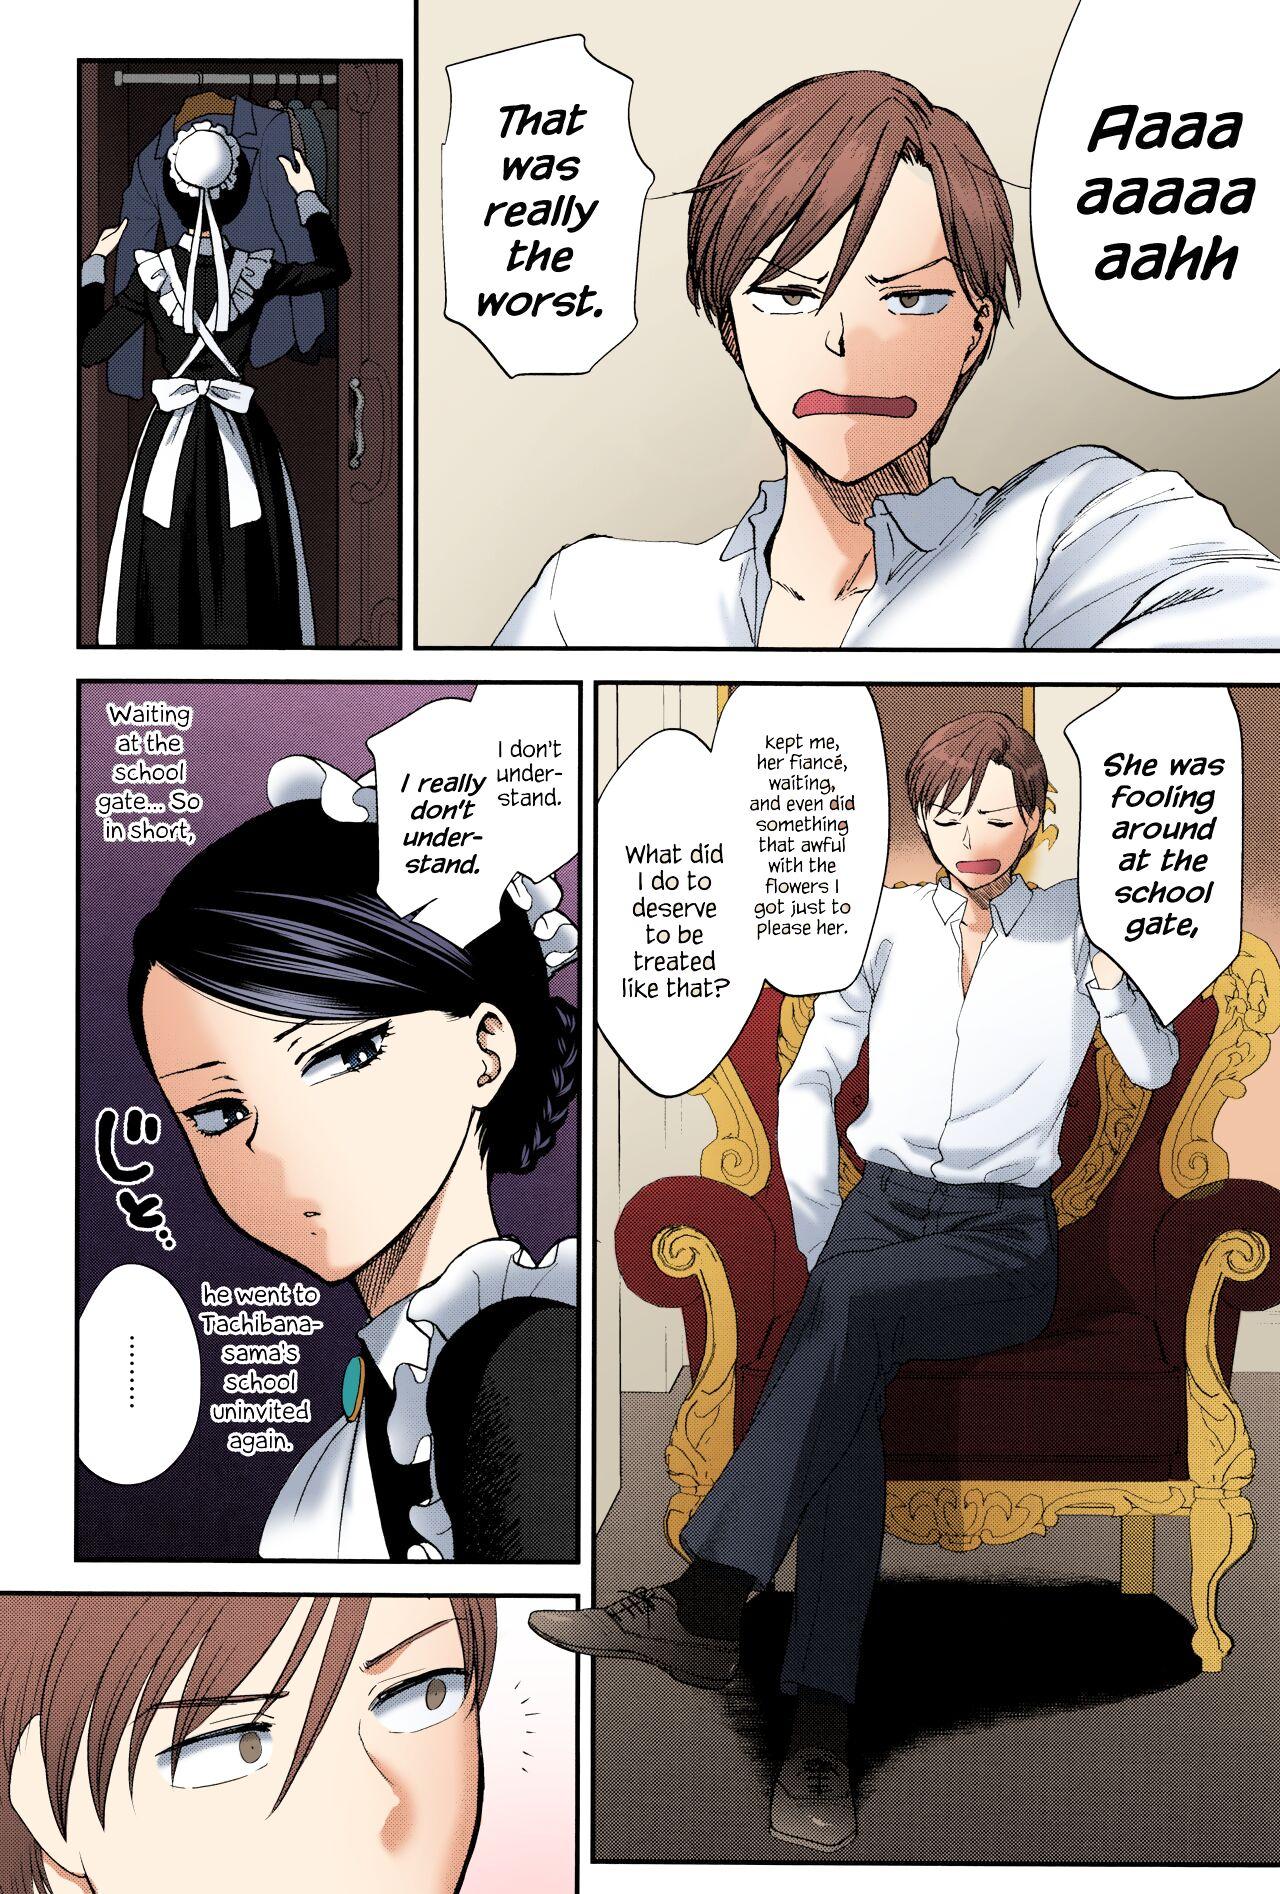 Esposa Kyoudou Well Maid - The Well “Maid” Instructor - Original Wanking - Page 2